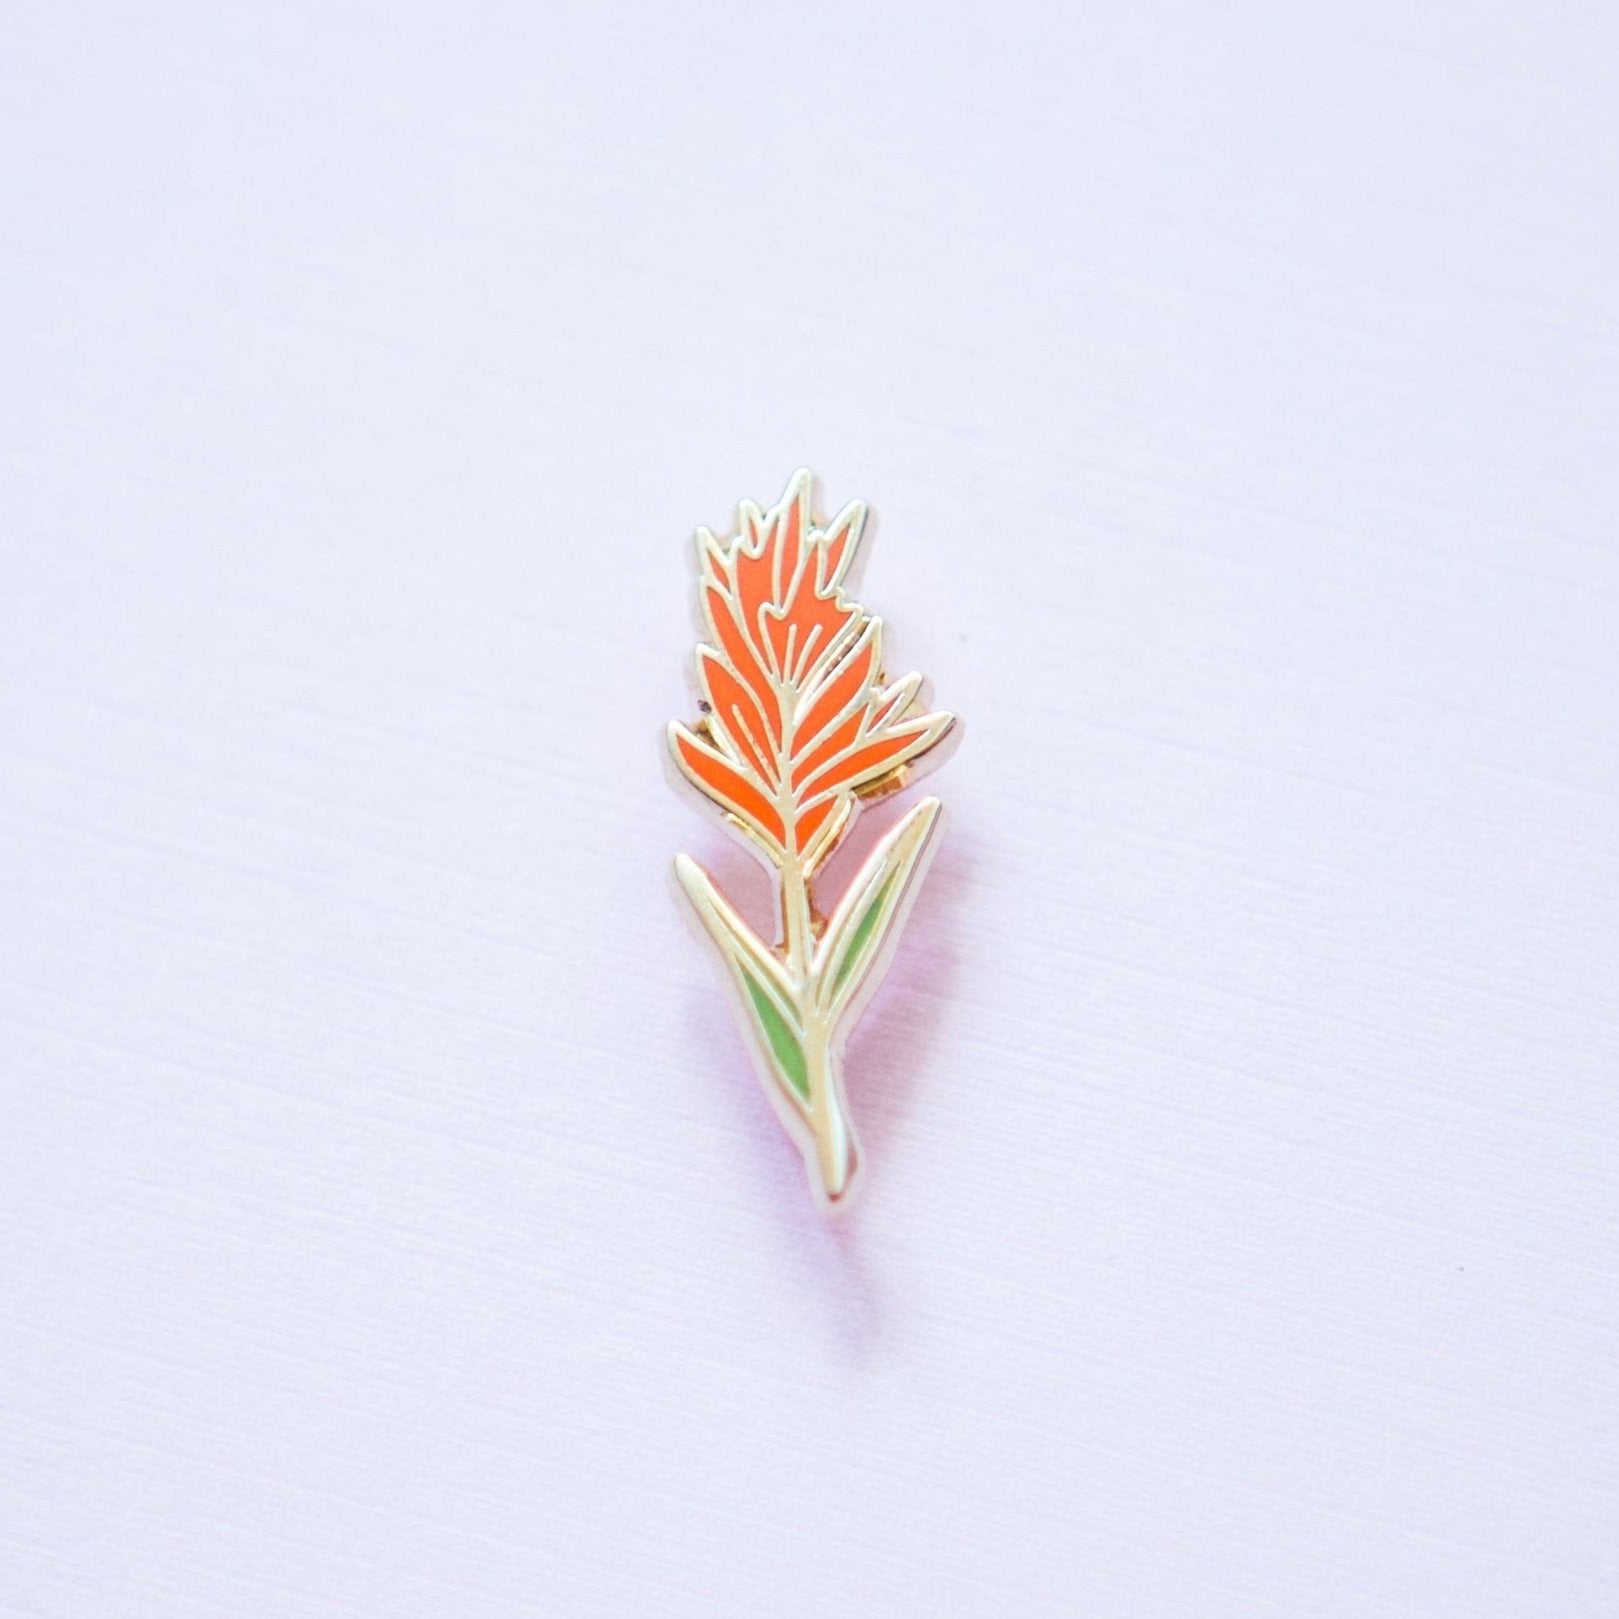 an indian paintbrush plant wildflower enamel pin made from red and green hard enamel and gold metal plating